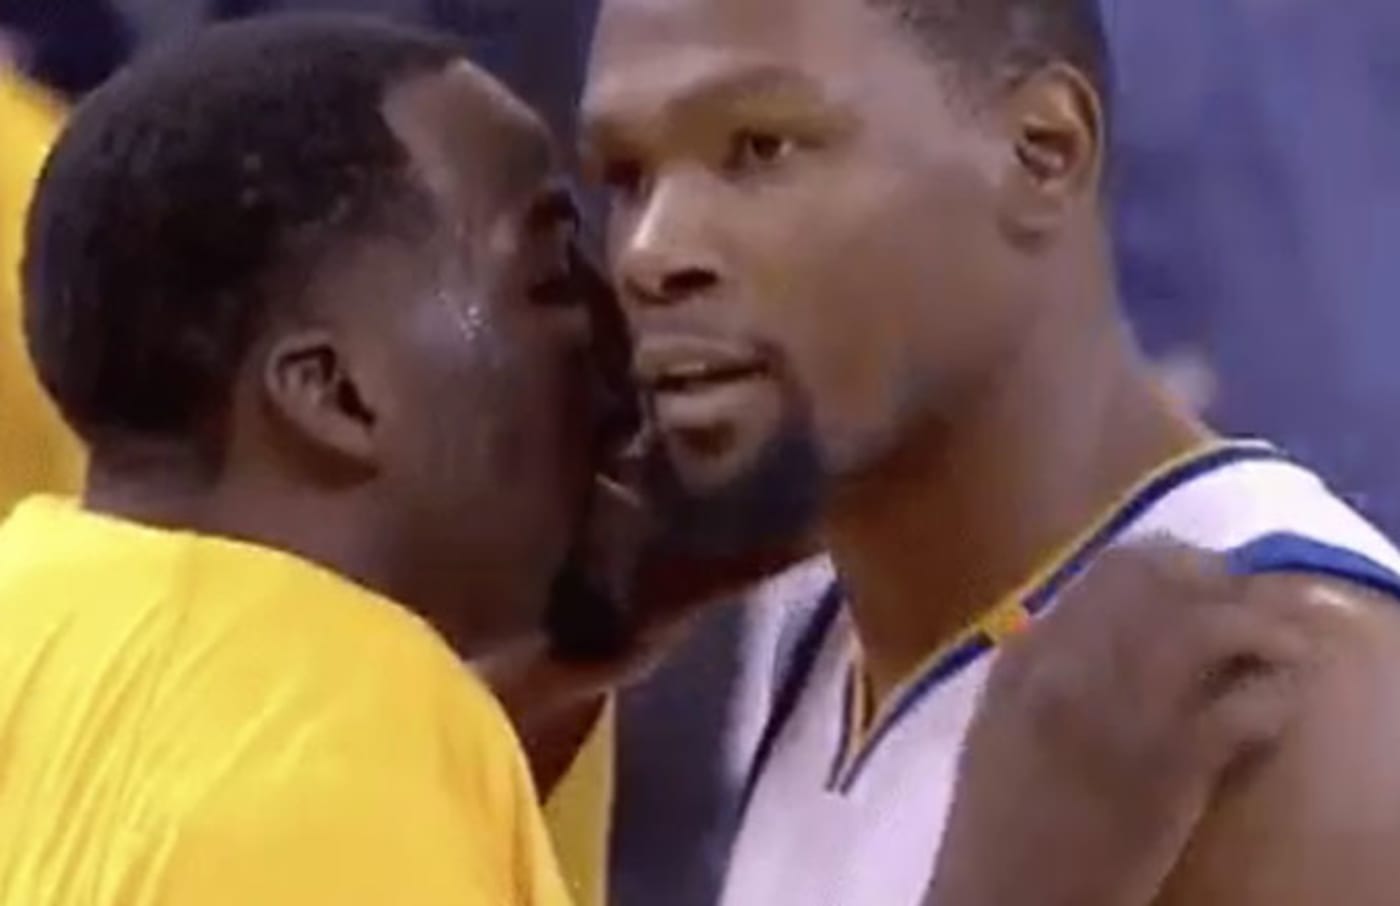 Draymond Green appears to give motivation to Kevin Durant.